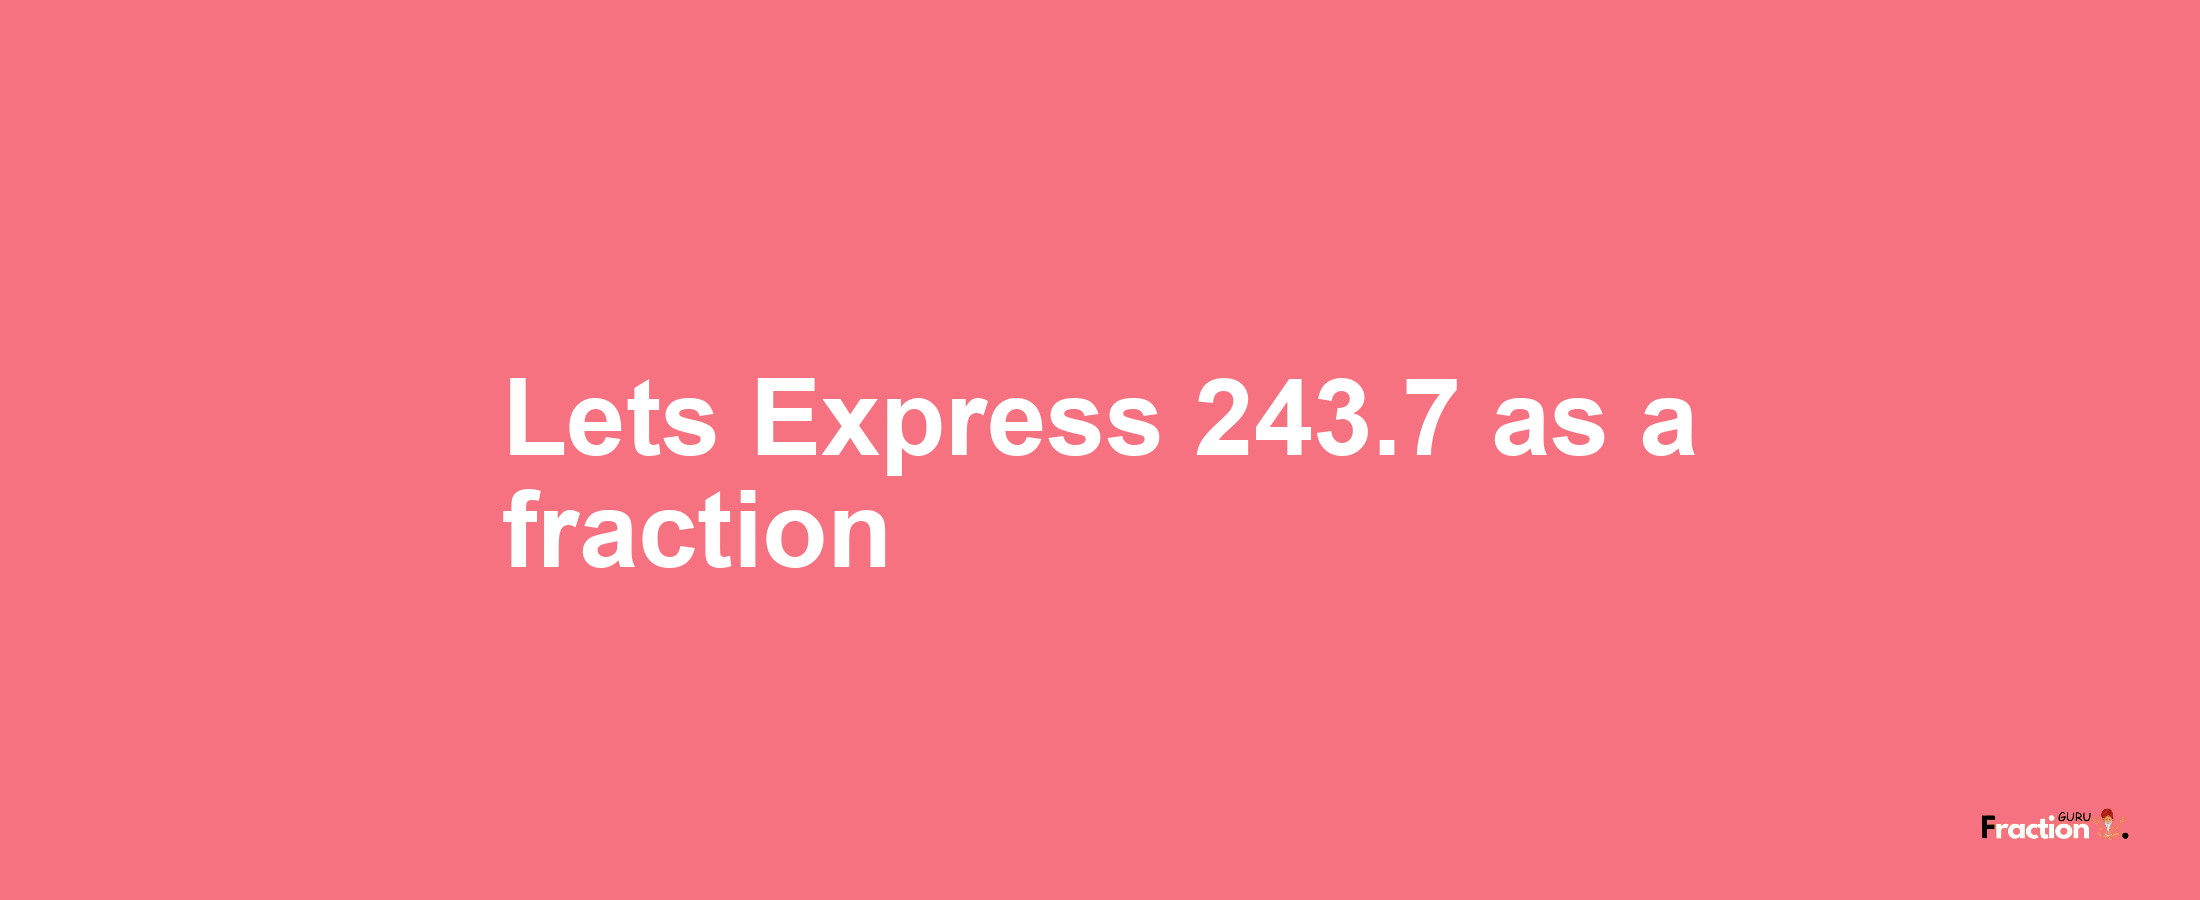 Lets Express 243.7 as afraction